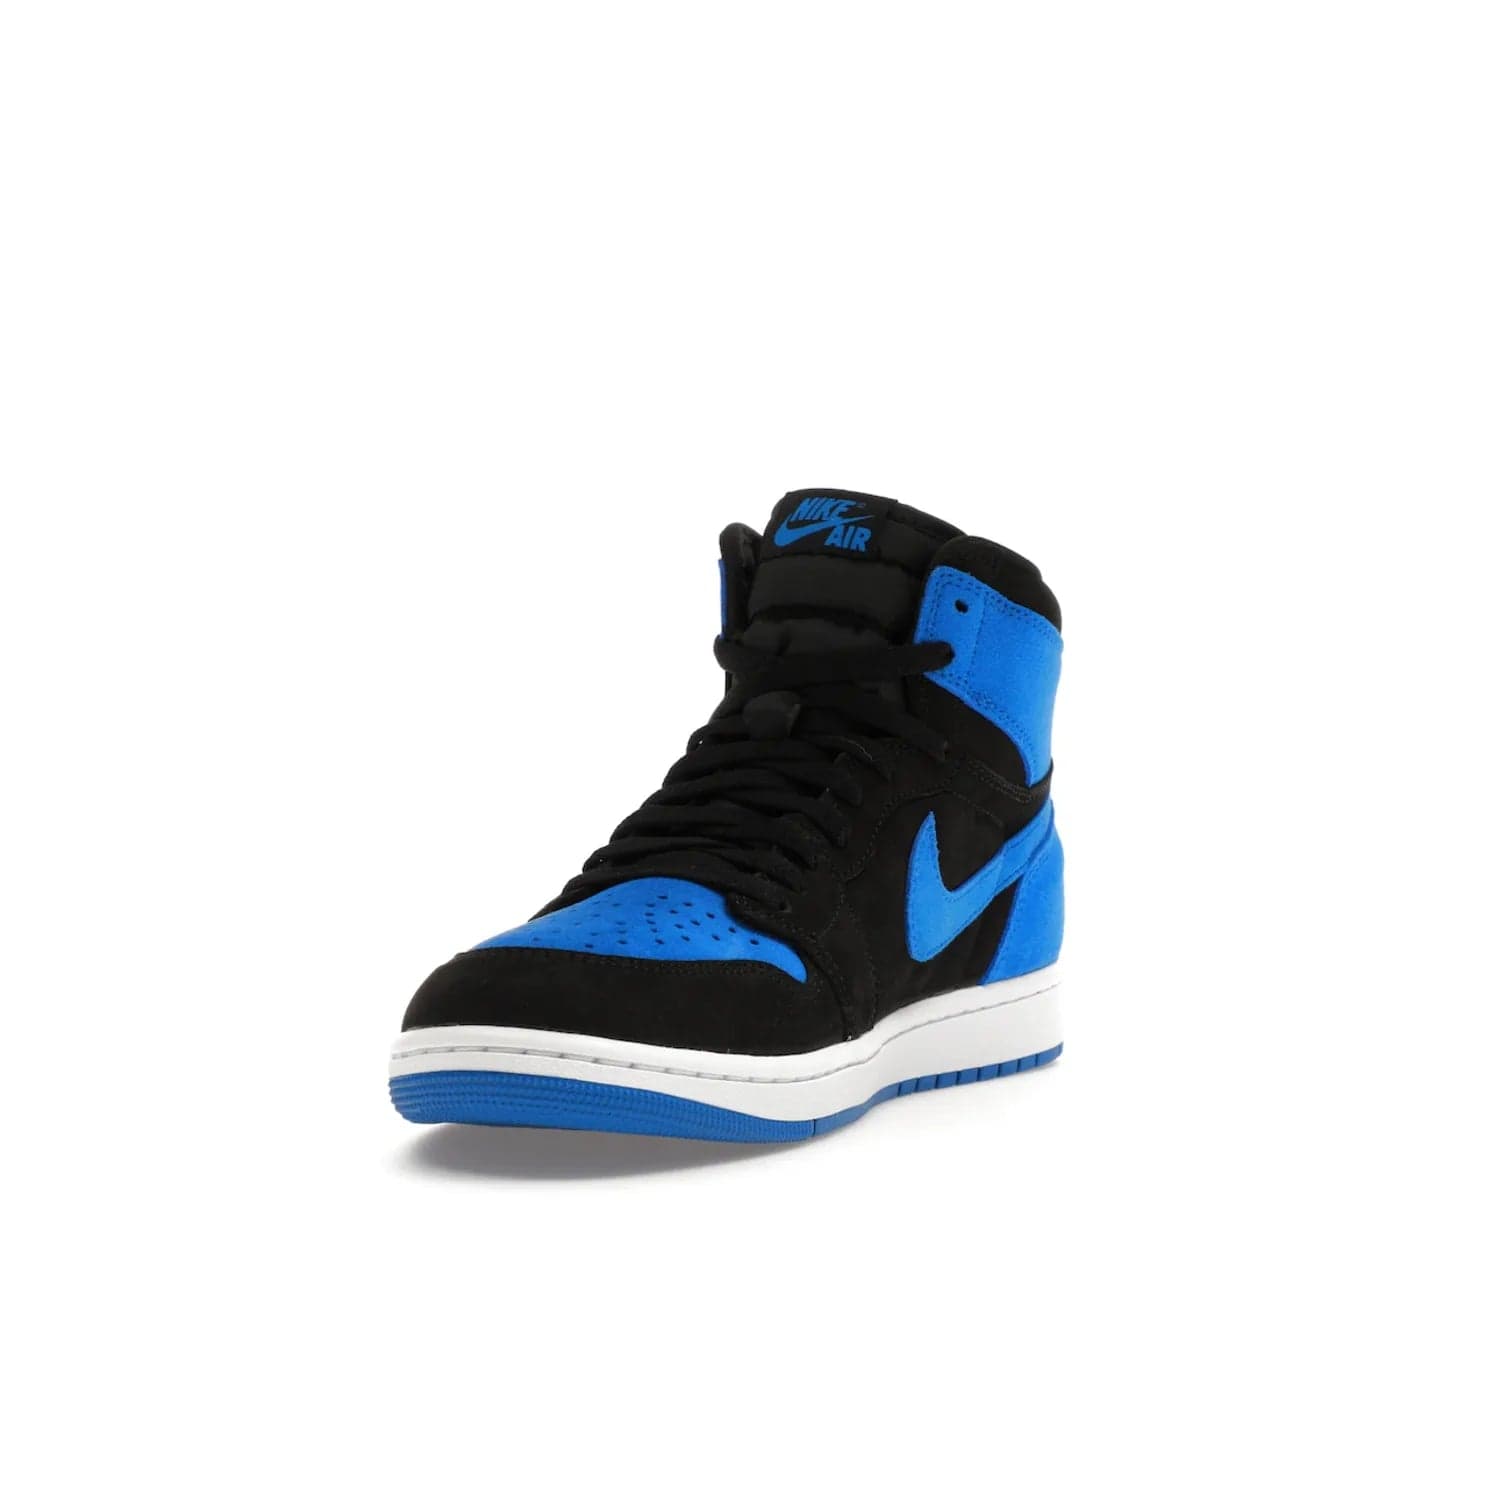 Jordan 1 Retro High OG Royal Reimagined - Image 13 - Only at www.BallersClubKickz.com - ####
Old meets the new: Jordan 1 Retro High OG 'Royal Reimagined' is a bold statement of evolution with its royal blue and black suede material makeup. Swoosh overlays, Wings logos, padded ankle collars and Nike Air tags maintain the OG's legendary lineage. Get a pair on November 4th and be part of a fearless, unyielding story.